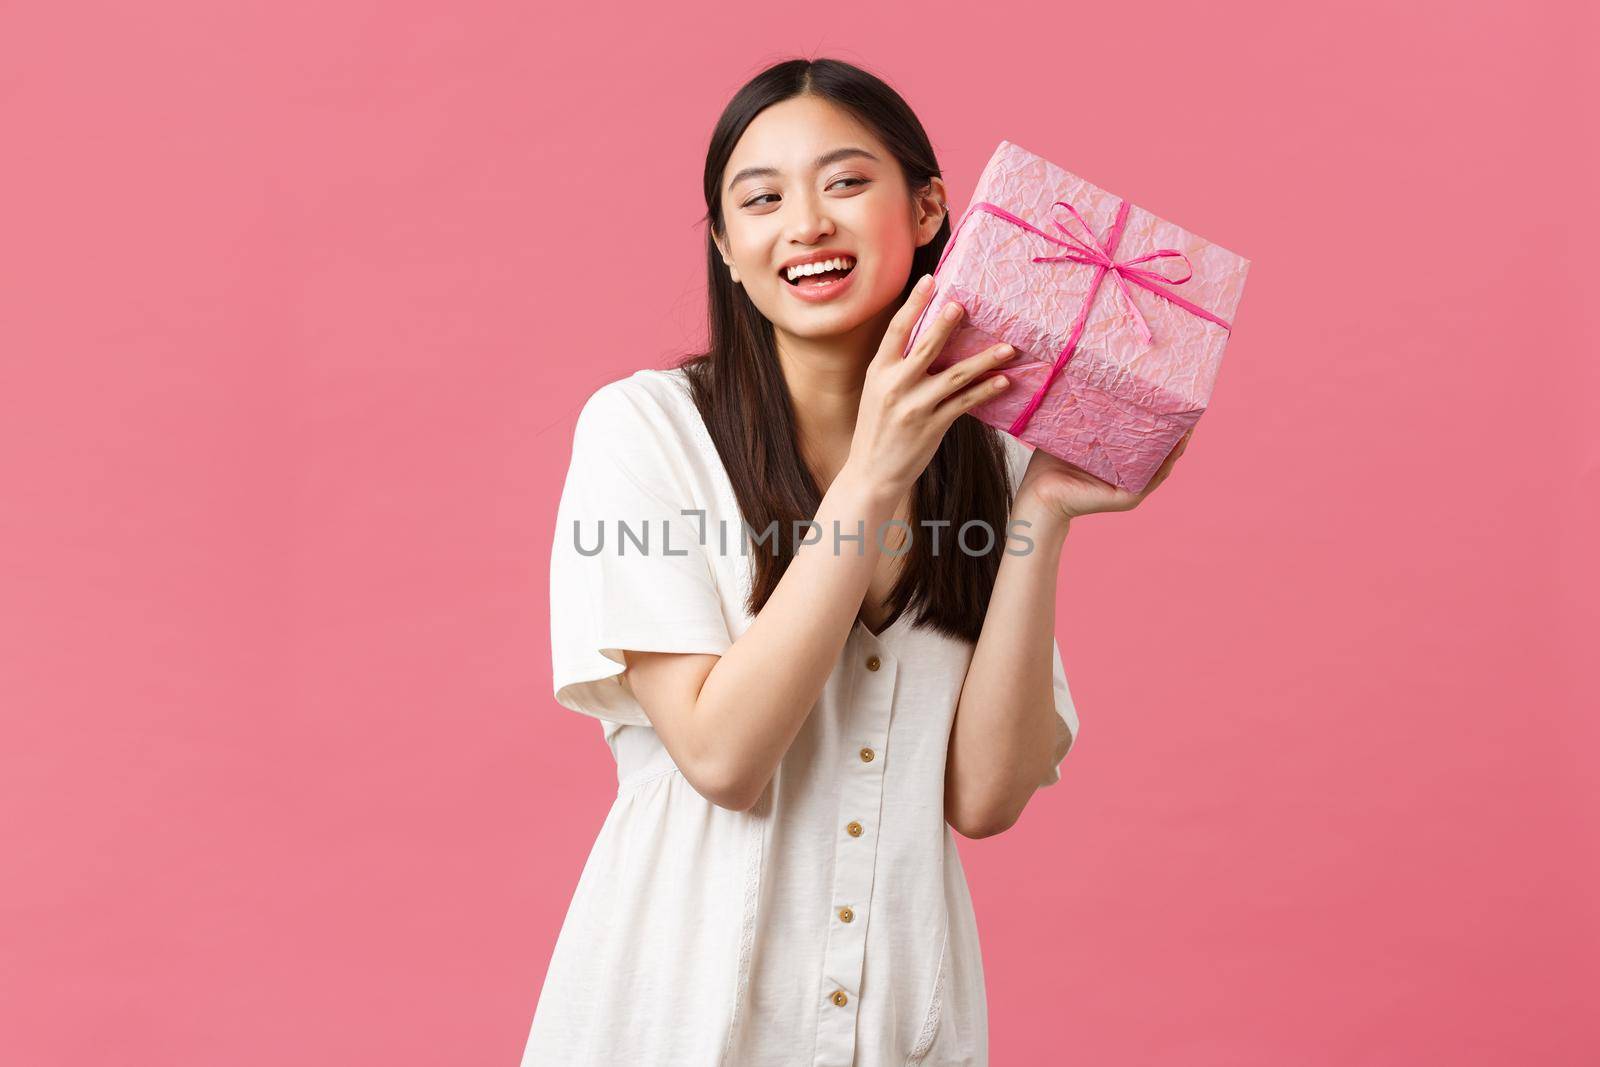 Celebration, party holidays and fun concept. Curious cute excited woman in white dress celebrating birthday, wonder whats inside b-day gift, shaking box and smiling happy, pink background.